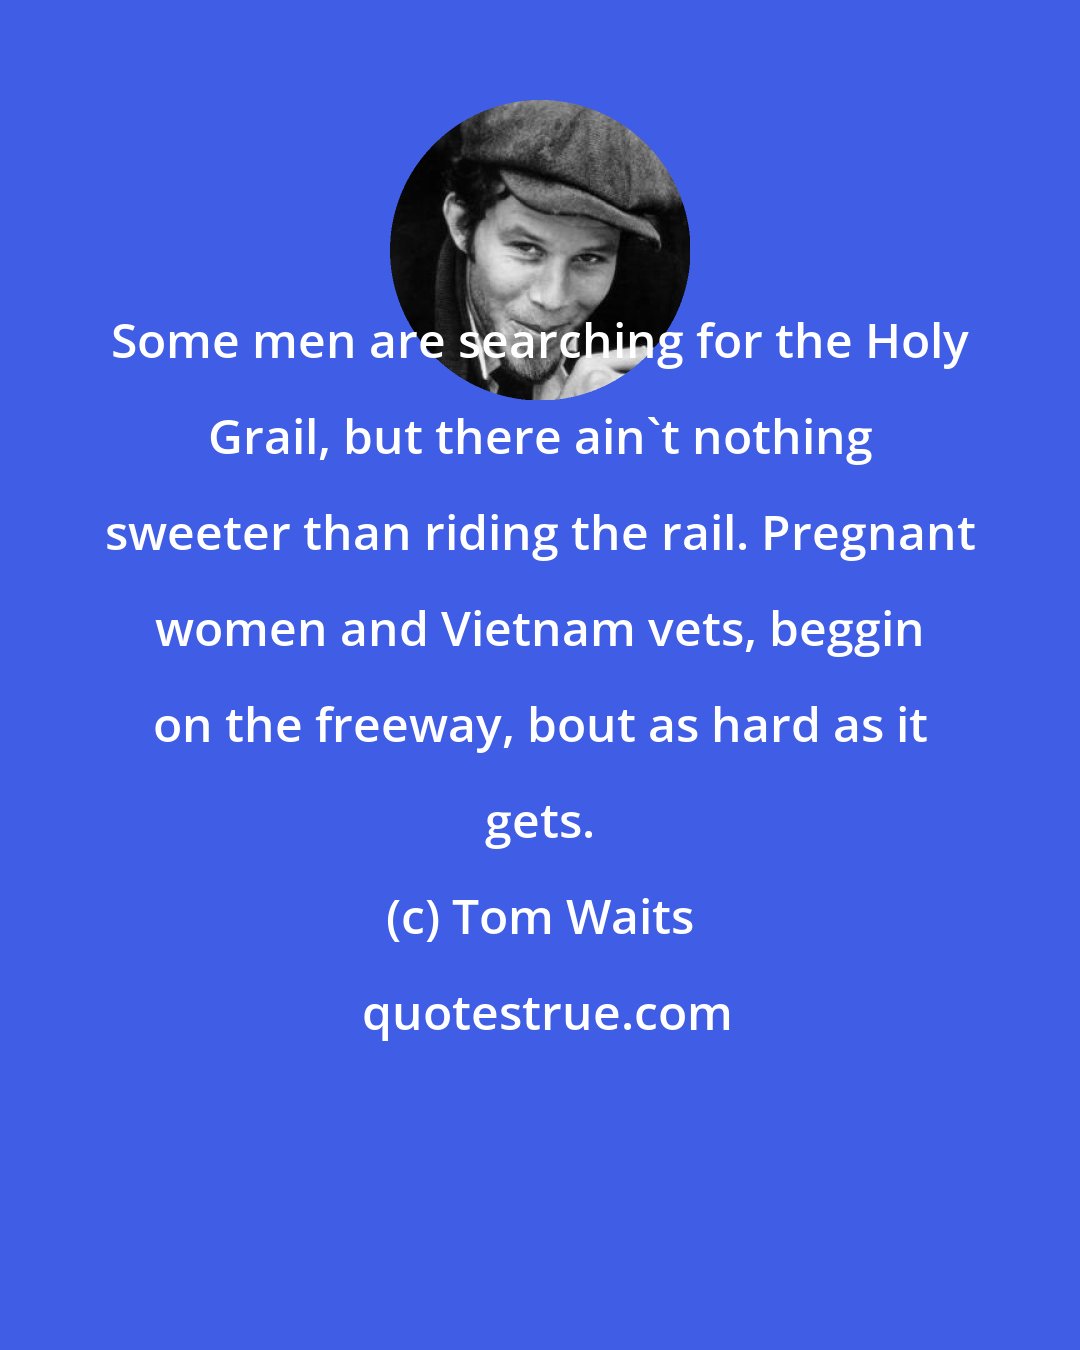 Tom Waits: Some men are searching for the Holy Grail, but there ain't nothing sweeter than riding the rail. Pregnant women and Vietnam vets, beggin on the freeway, bout as hard as it gets.